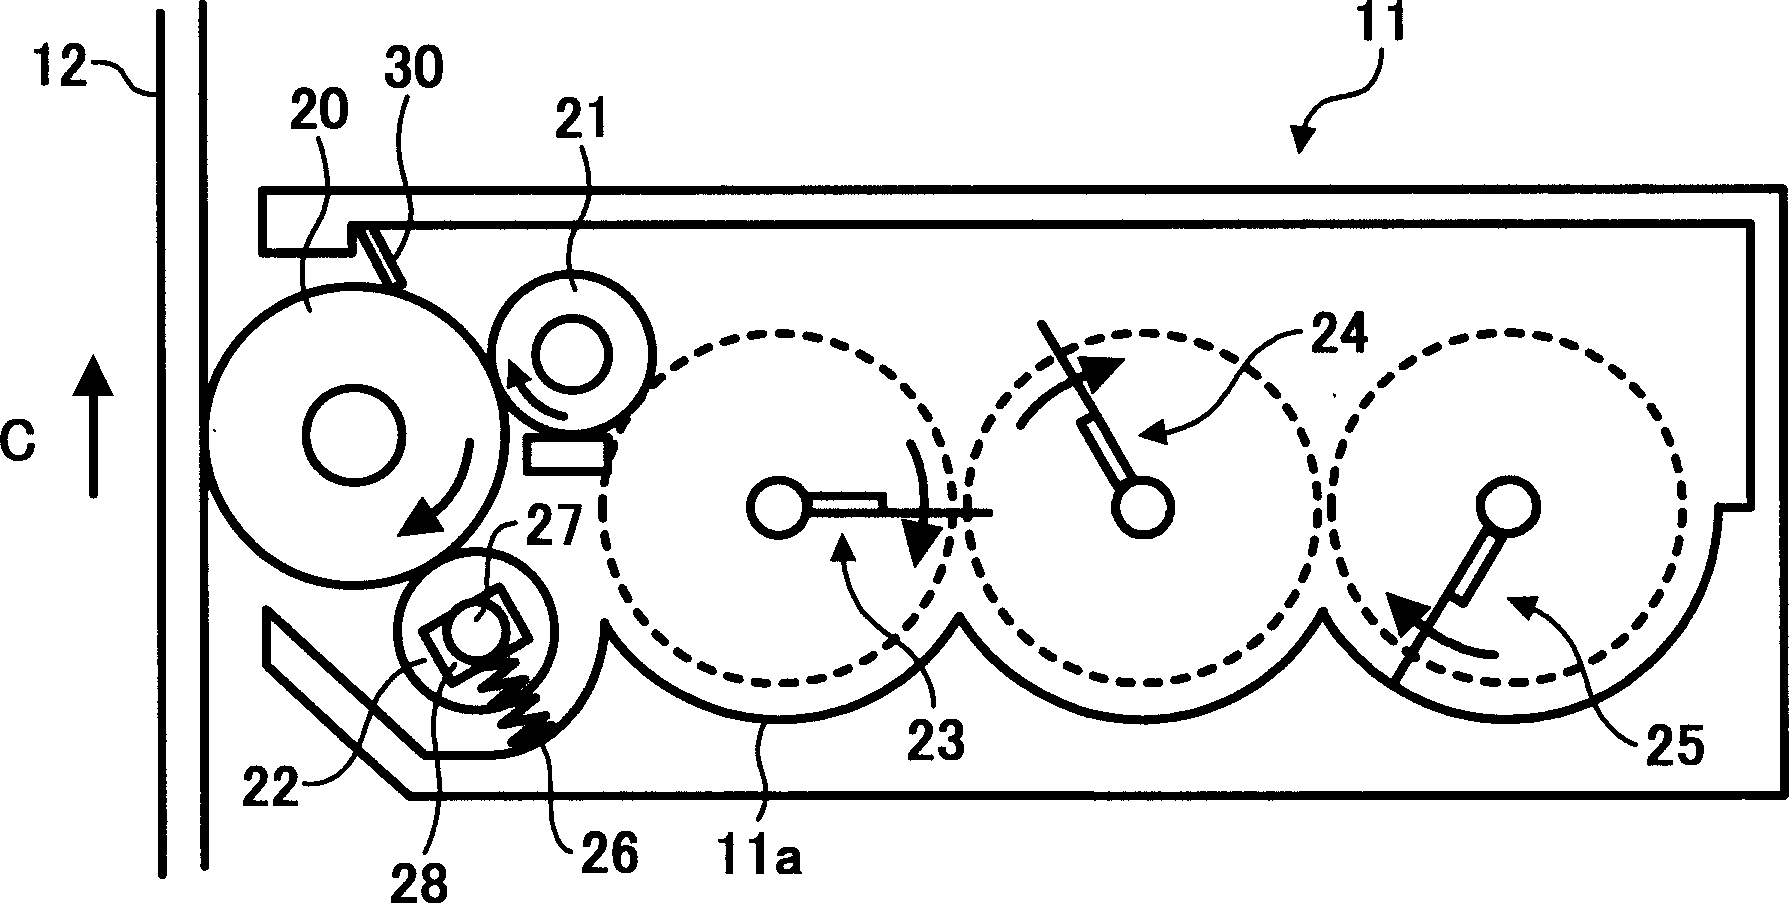 Developing starting method, developing device and processing card box